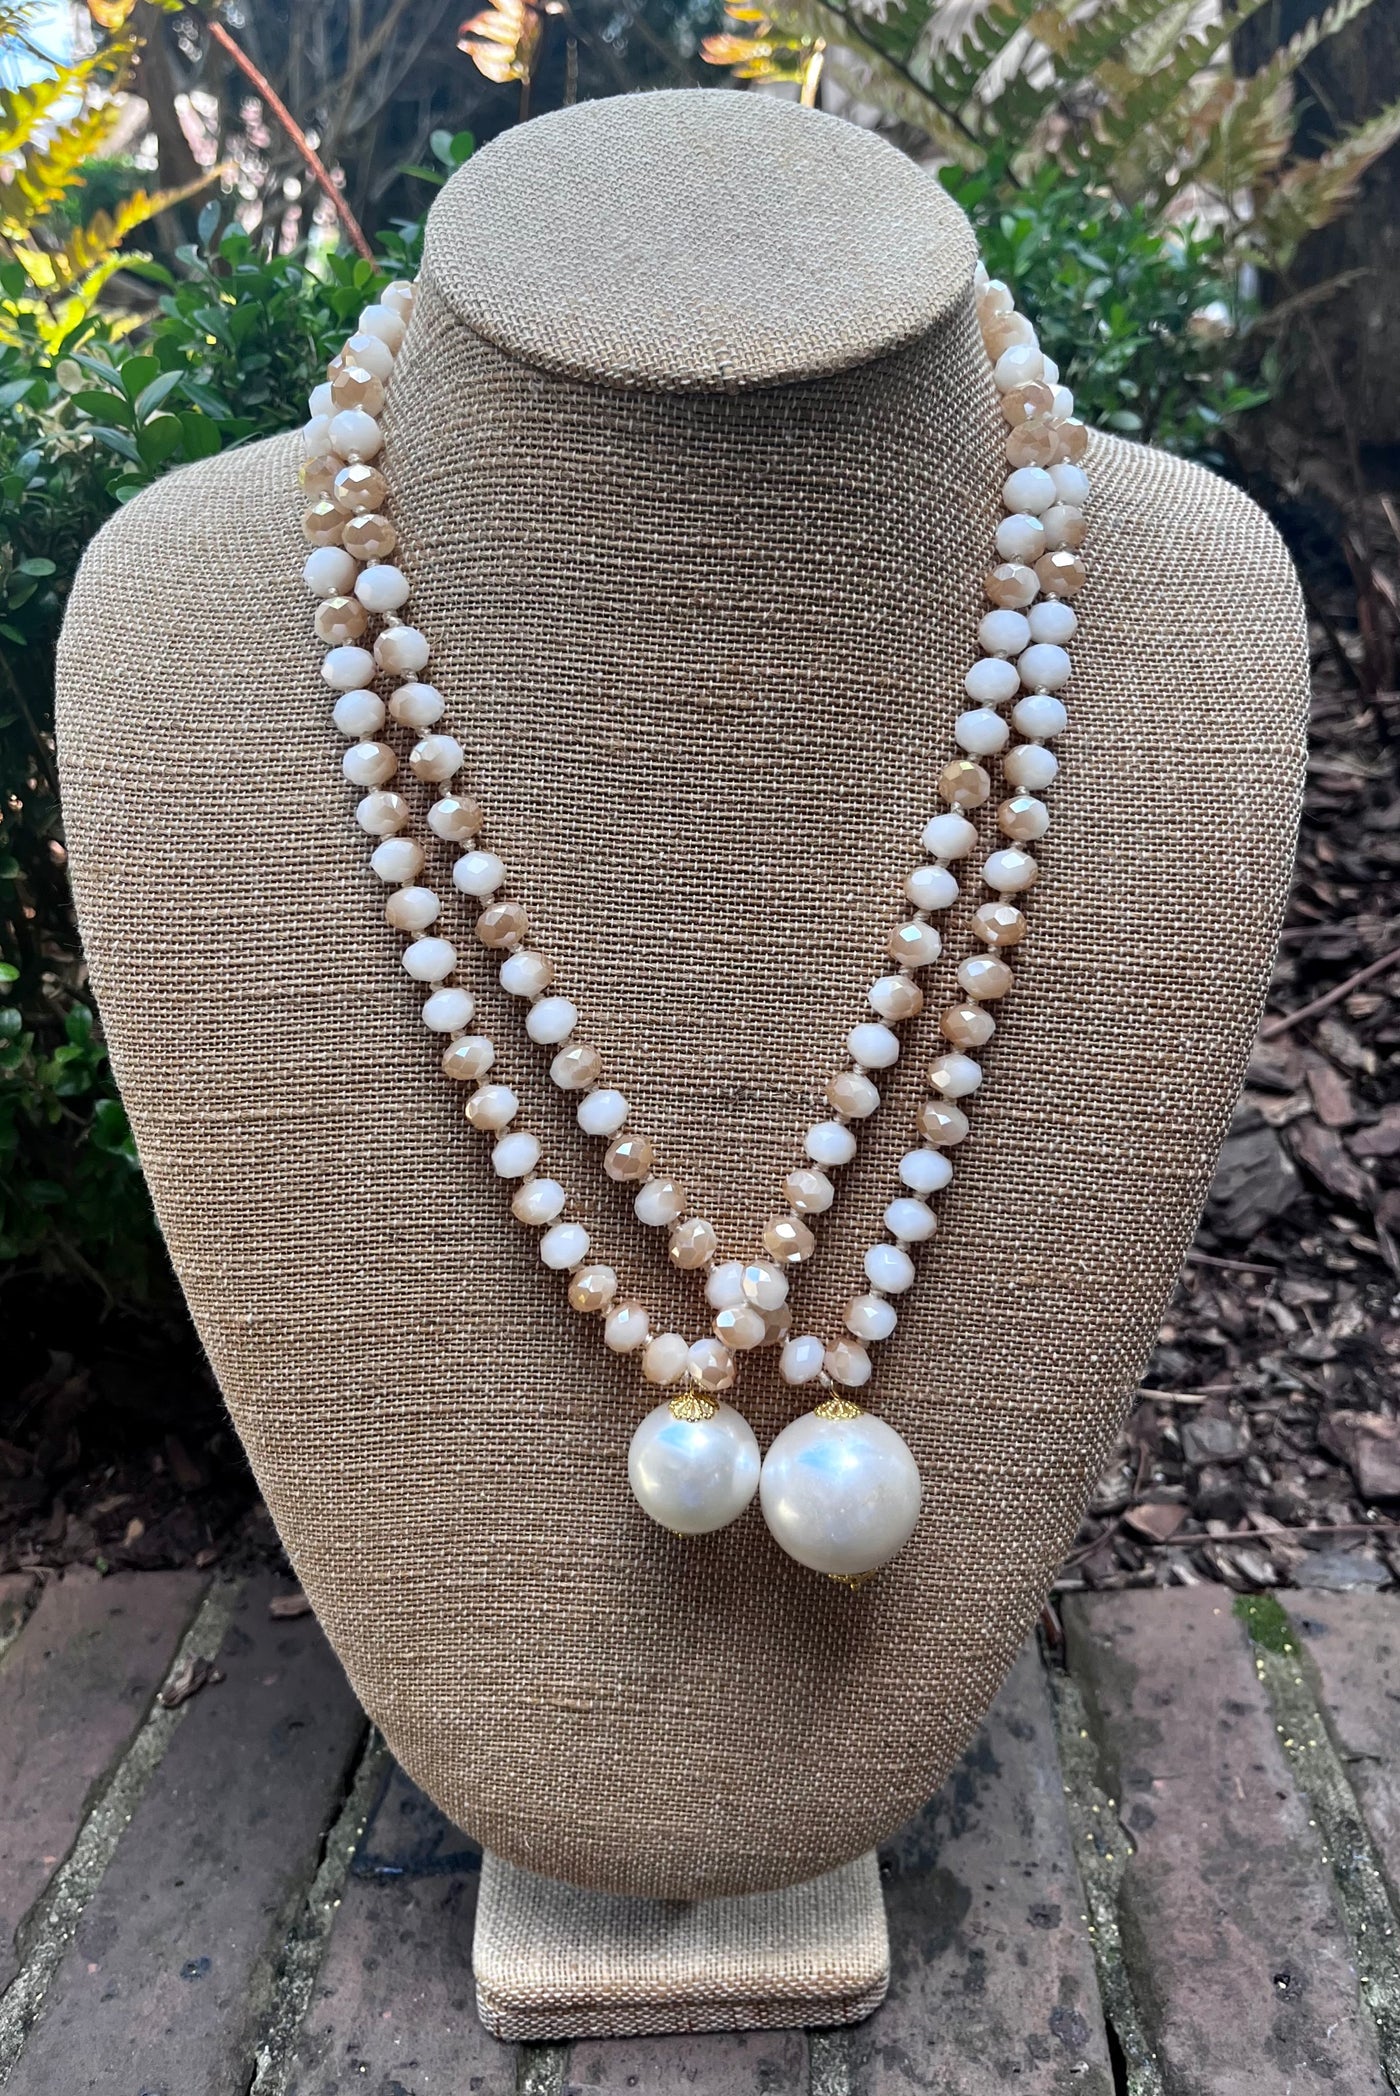 Italian Crystal with Large Pearl Accents Necklace